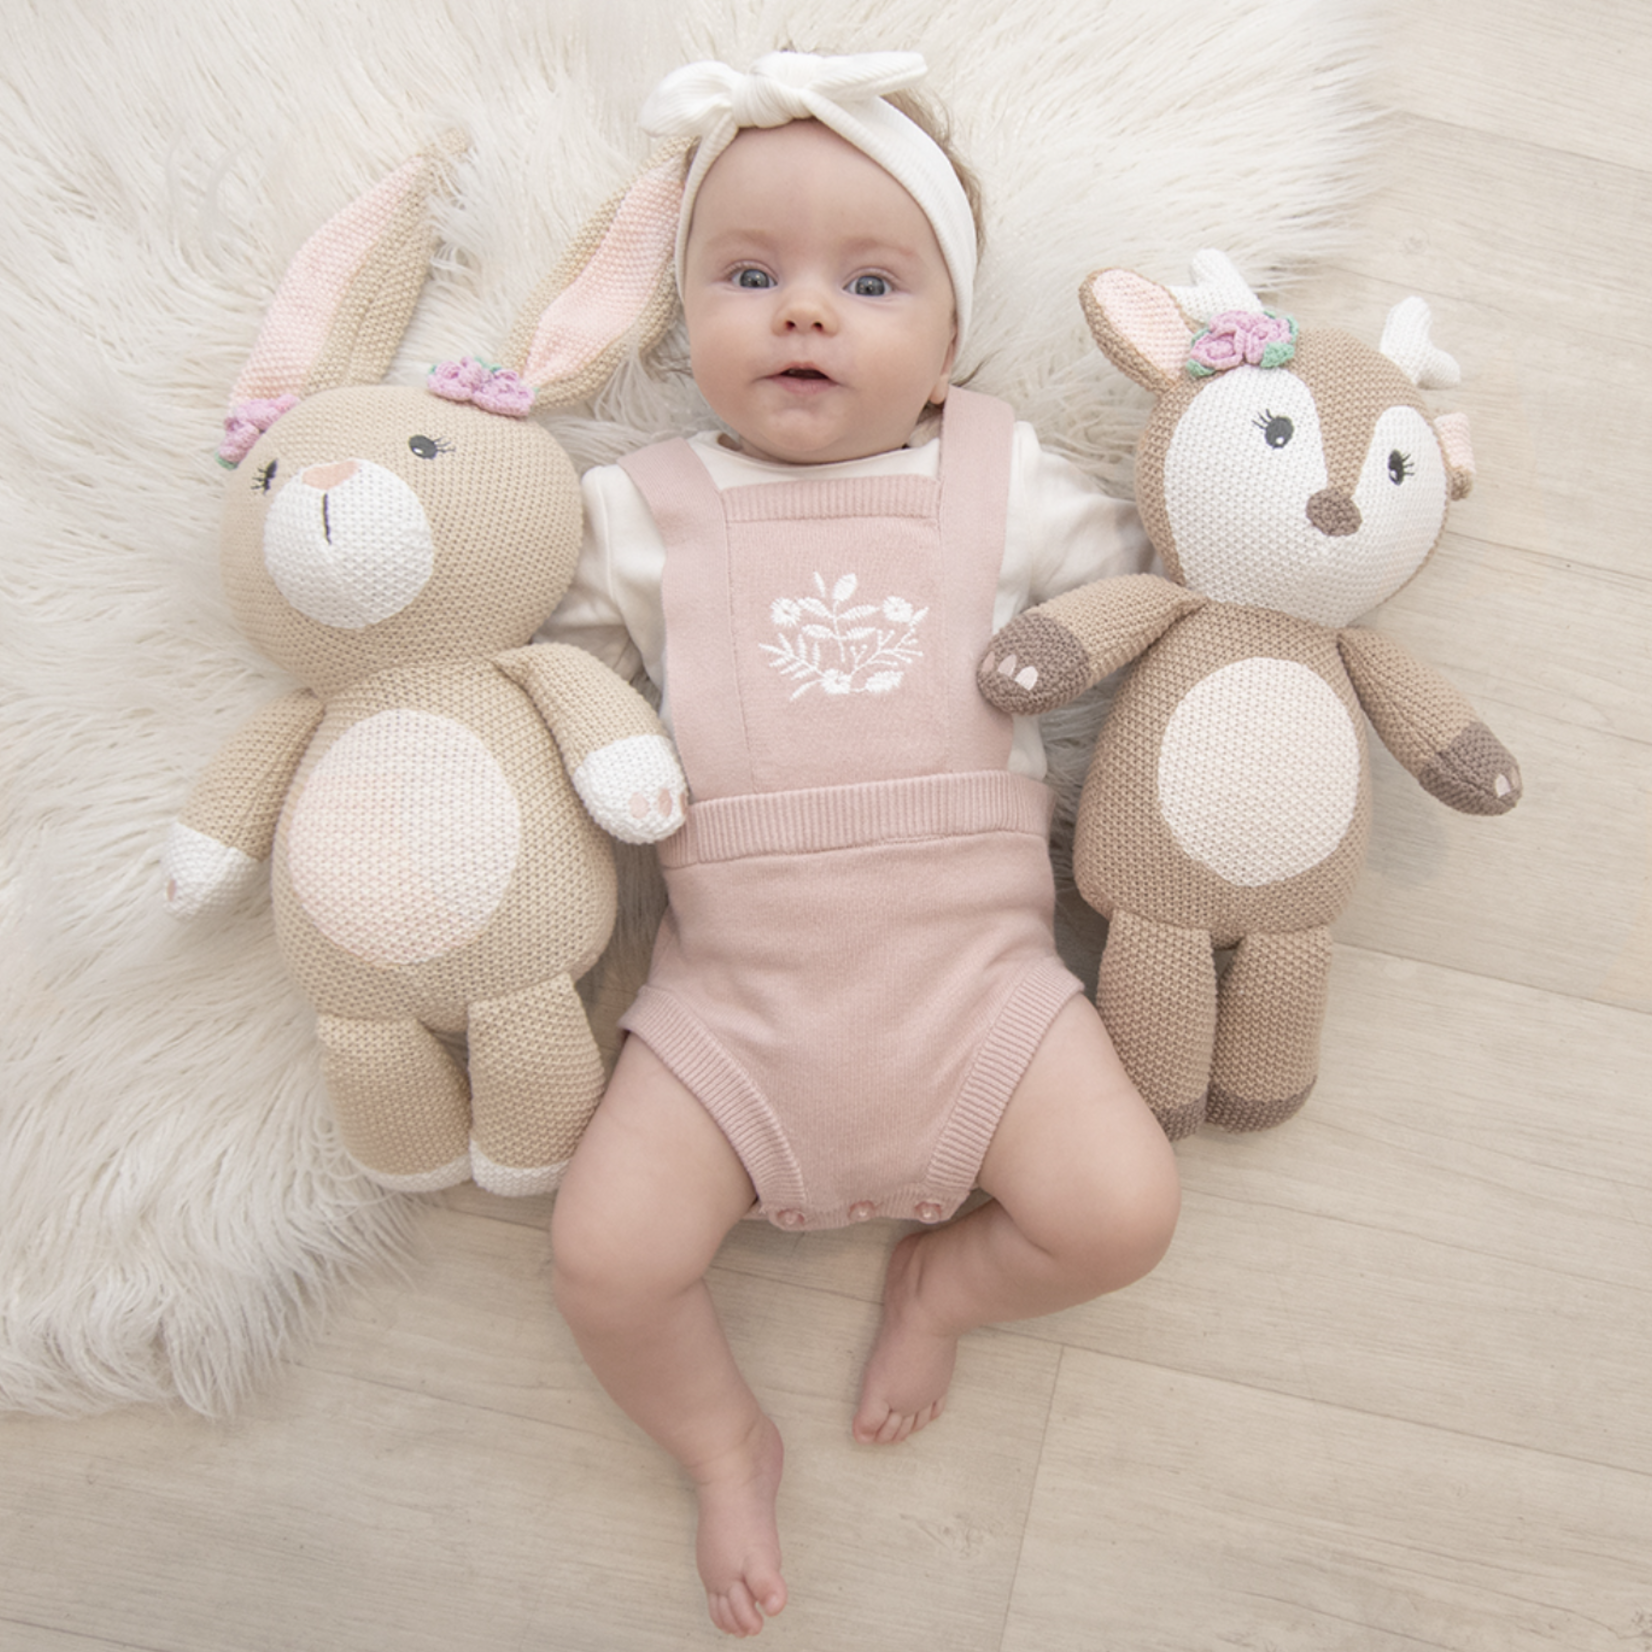 Living Textiles Ava the Fawn Knitted Toy